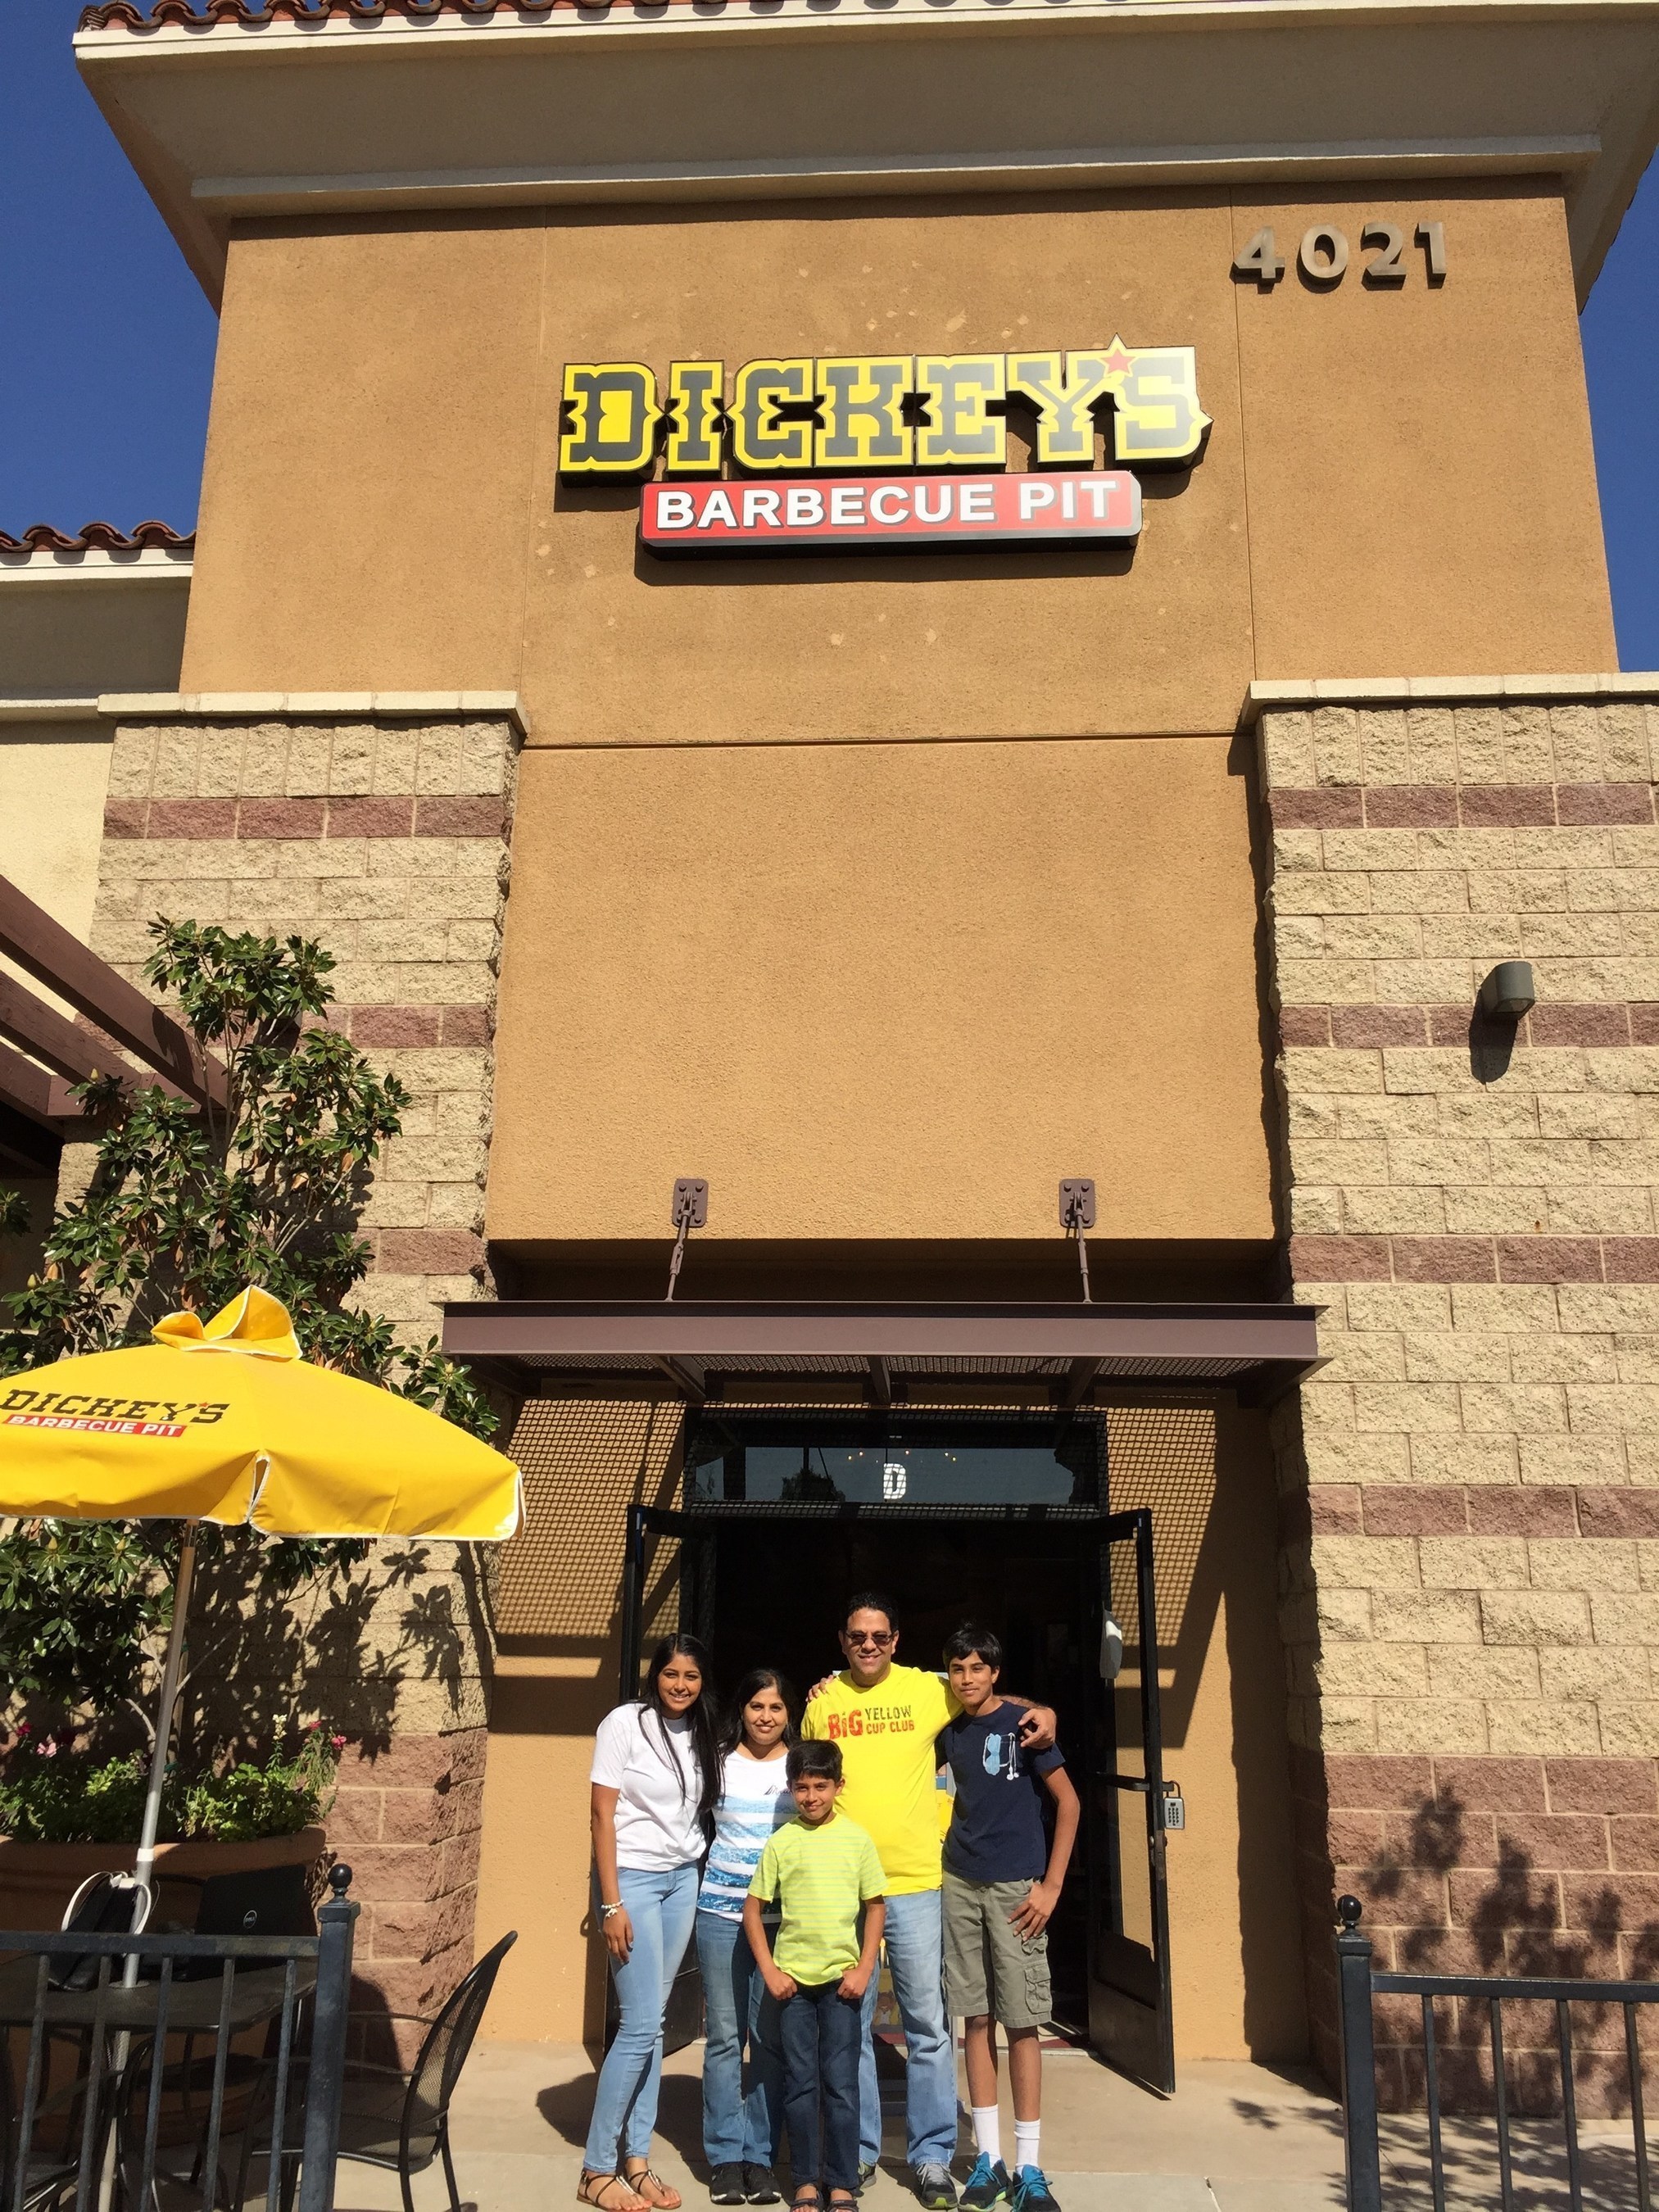 Dickey's Barbecue Pit celebrates new location with a three day grand opening celebration where three lucky guests win free barbecue for an entire year!